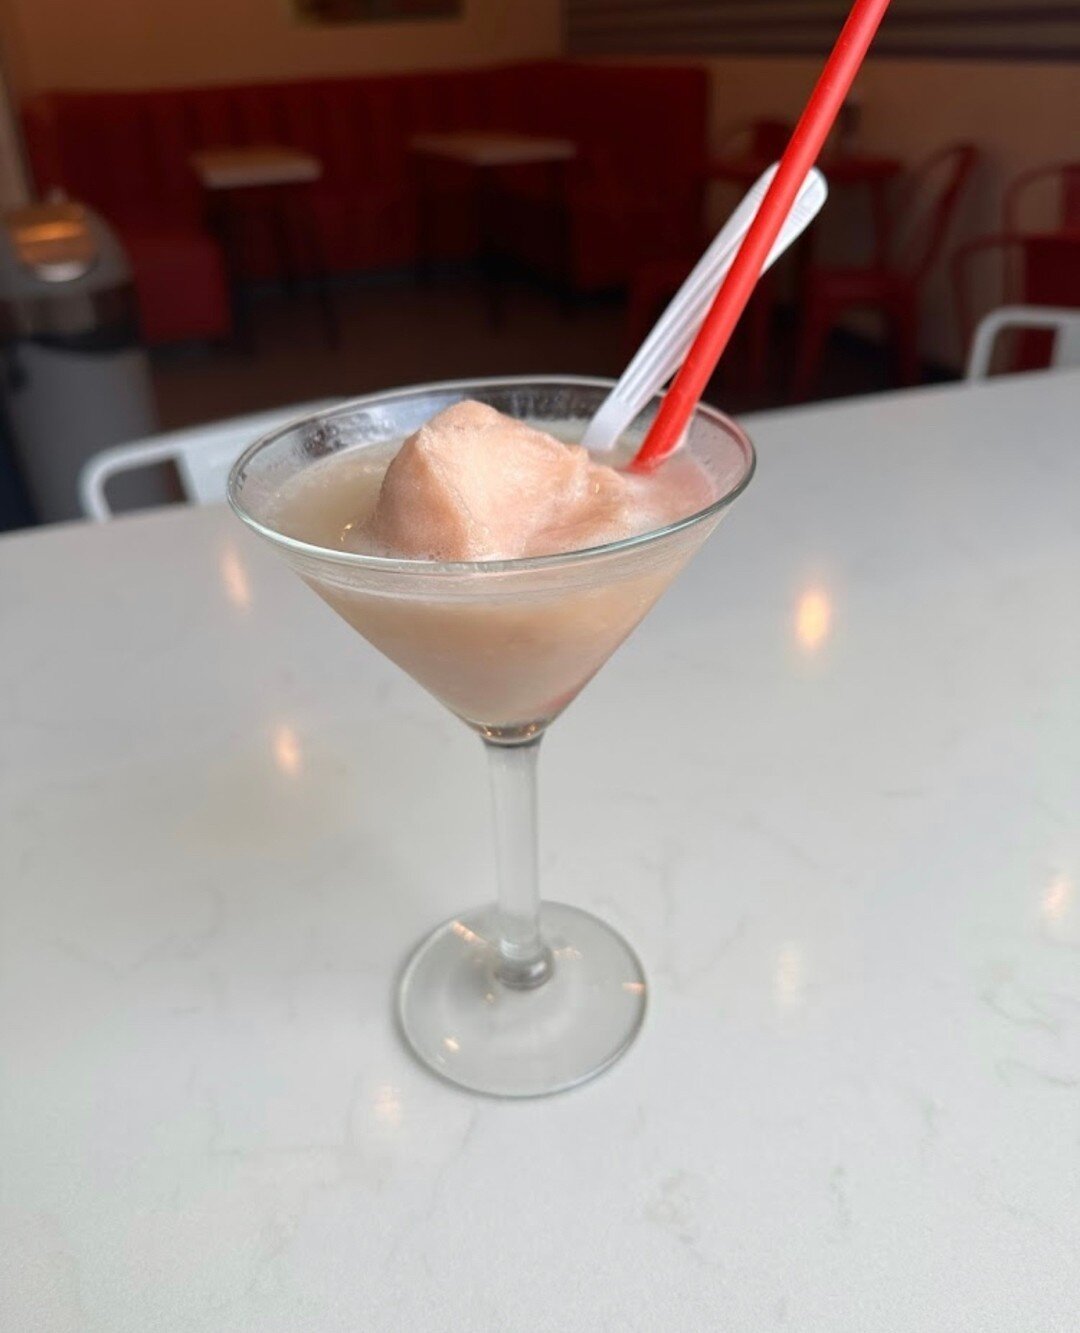 Looking for a mid-week pick-me-up?⁠
⁠
😎 Our shop offers more than just ice cream. ⁠
⁠
Come check out our selection of extra special adult treats to go with your ice cream!⁠
.⁠
.⁠
.⁠
.⁠
.⁠
.⁠
.⁠
.⁠
.⁠
#denver #denversbest #denverfood #denverdesserts 